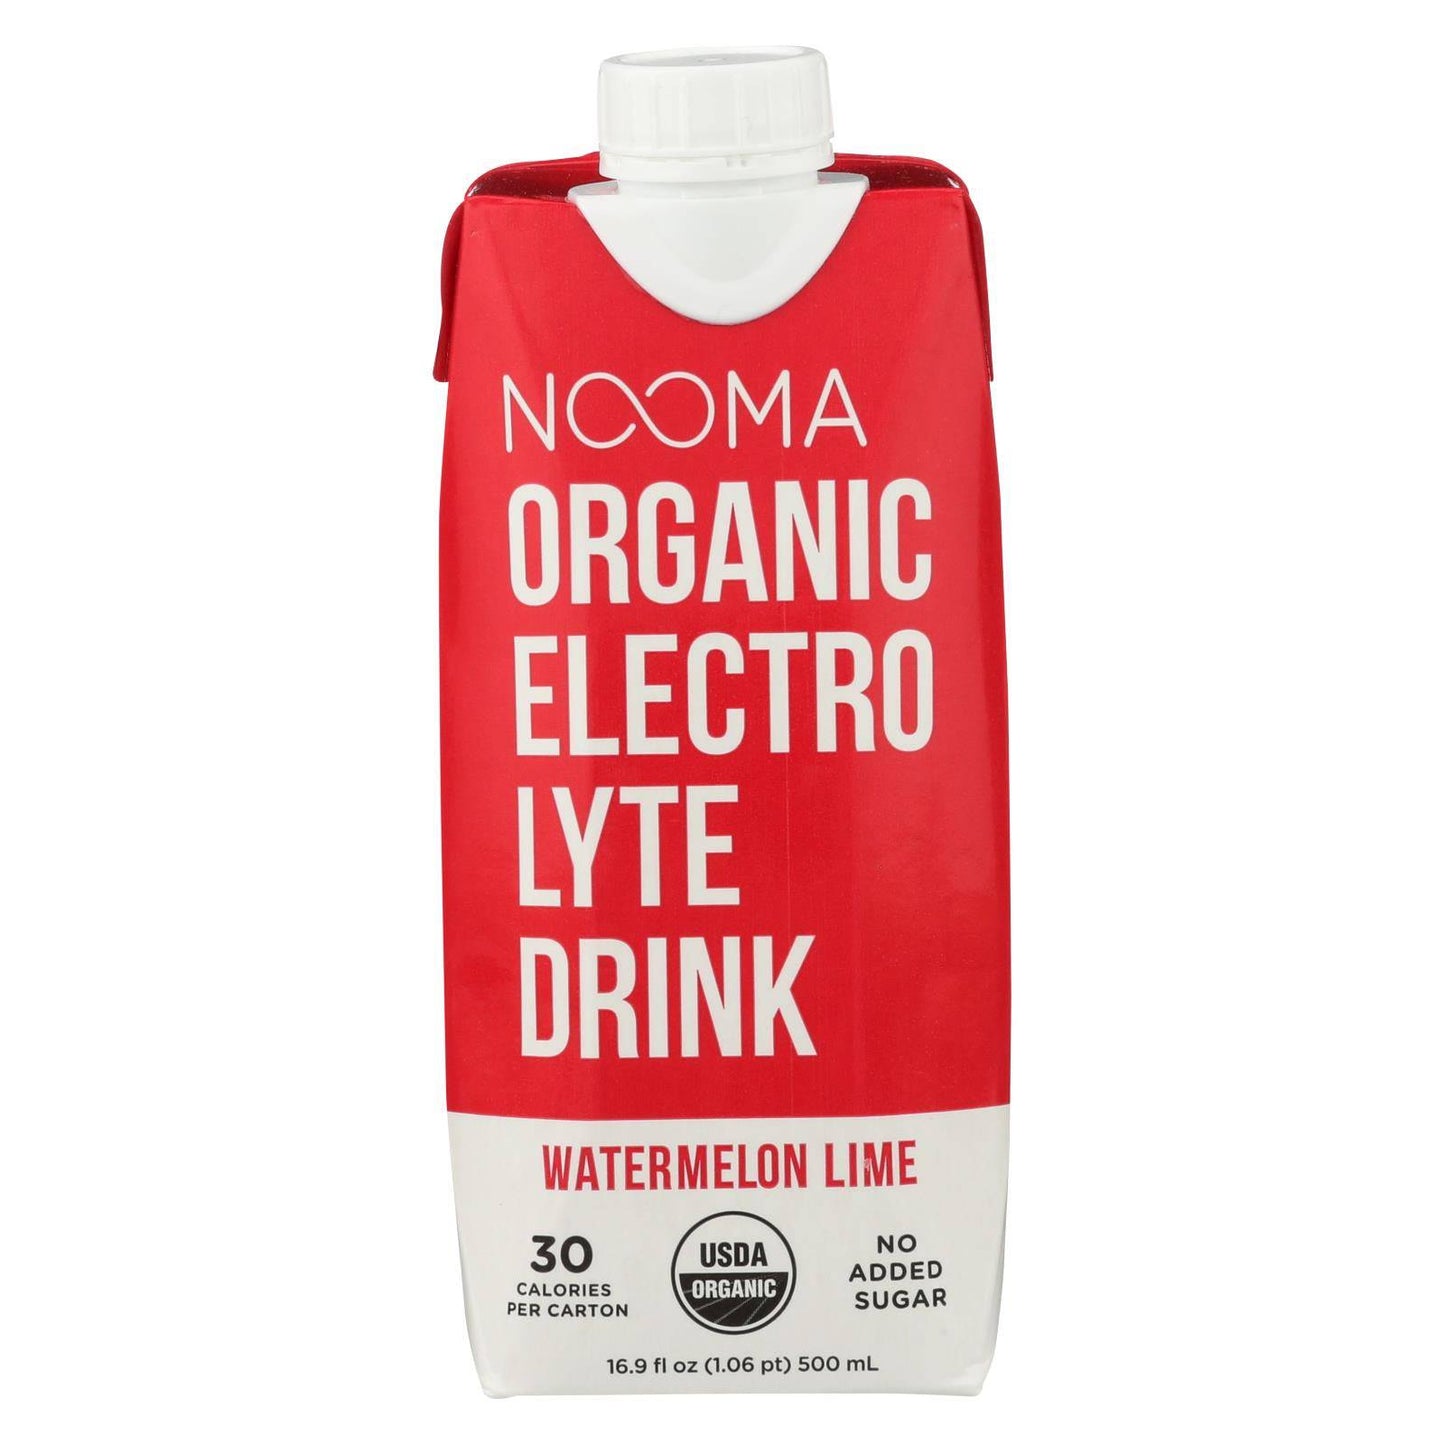 Buy Nooma Electrolite Drink - Organic - Watermelon Lime - Case Of 12 - 16.9 Fl Oz  at OnlyNaturals.us